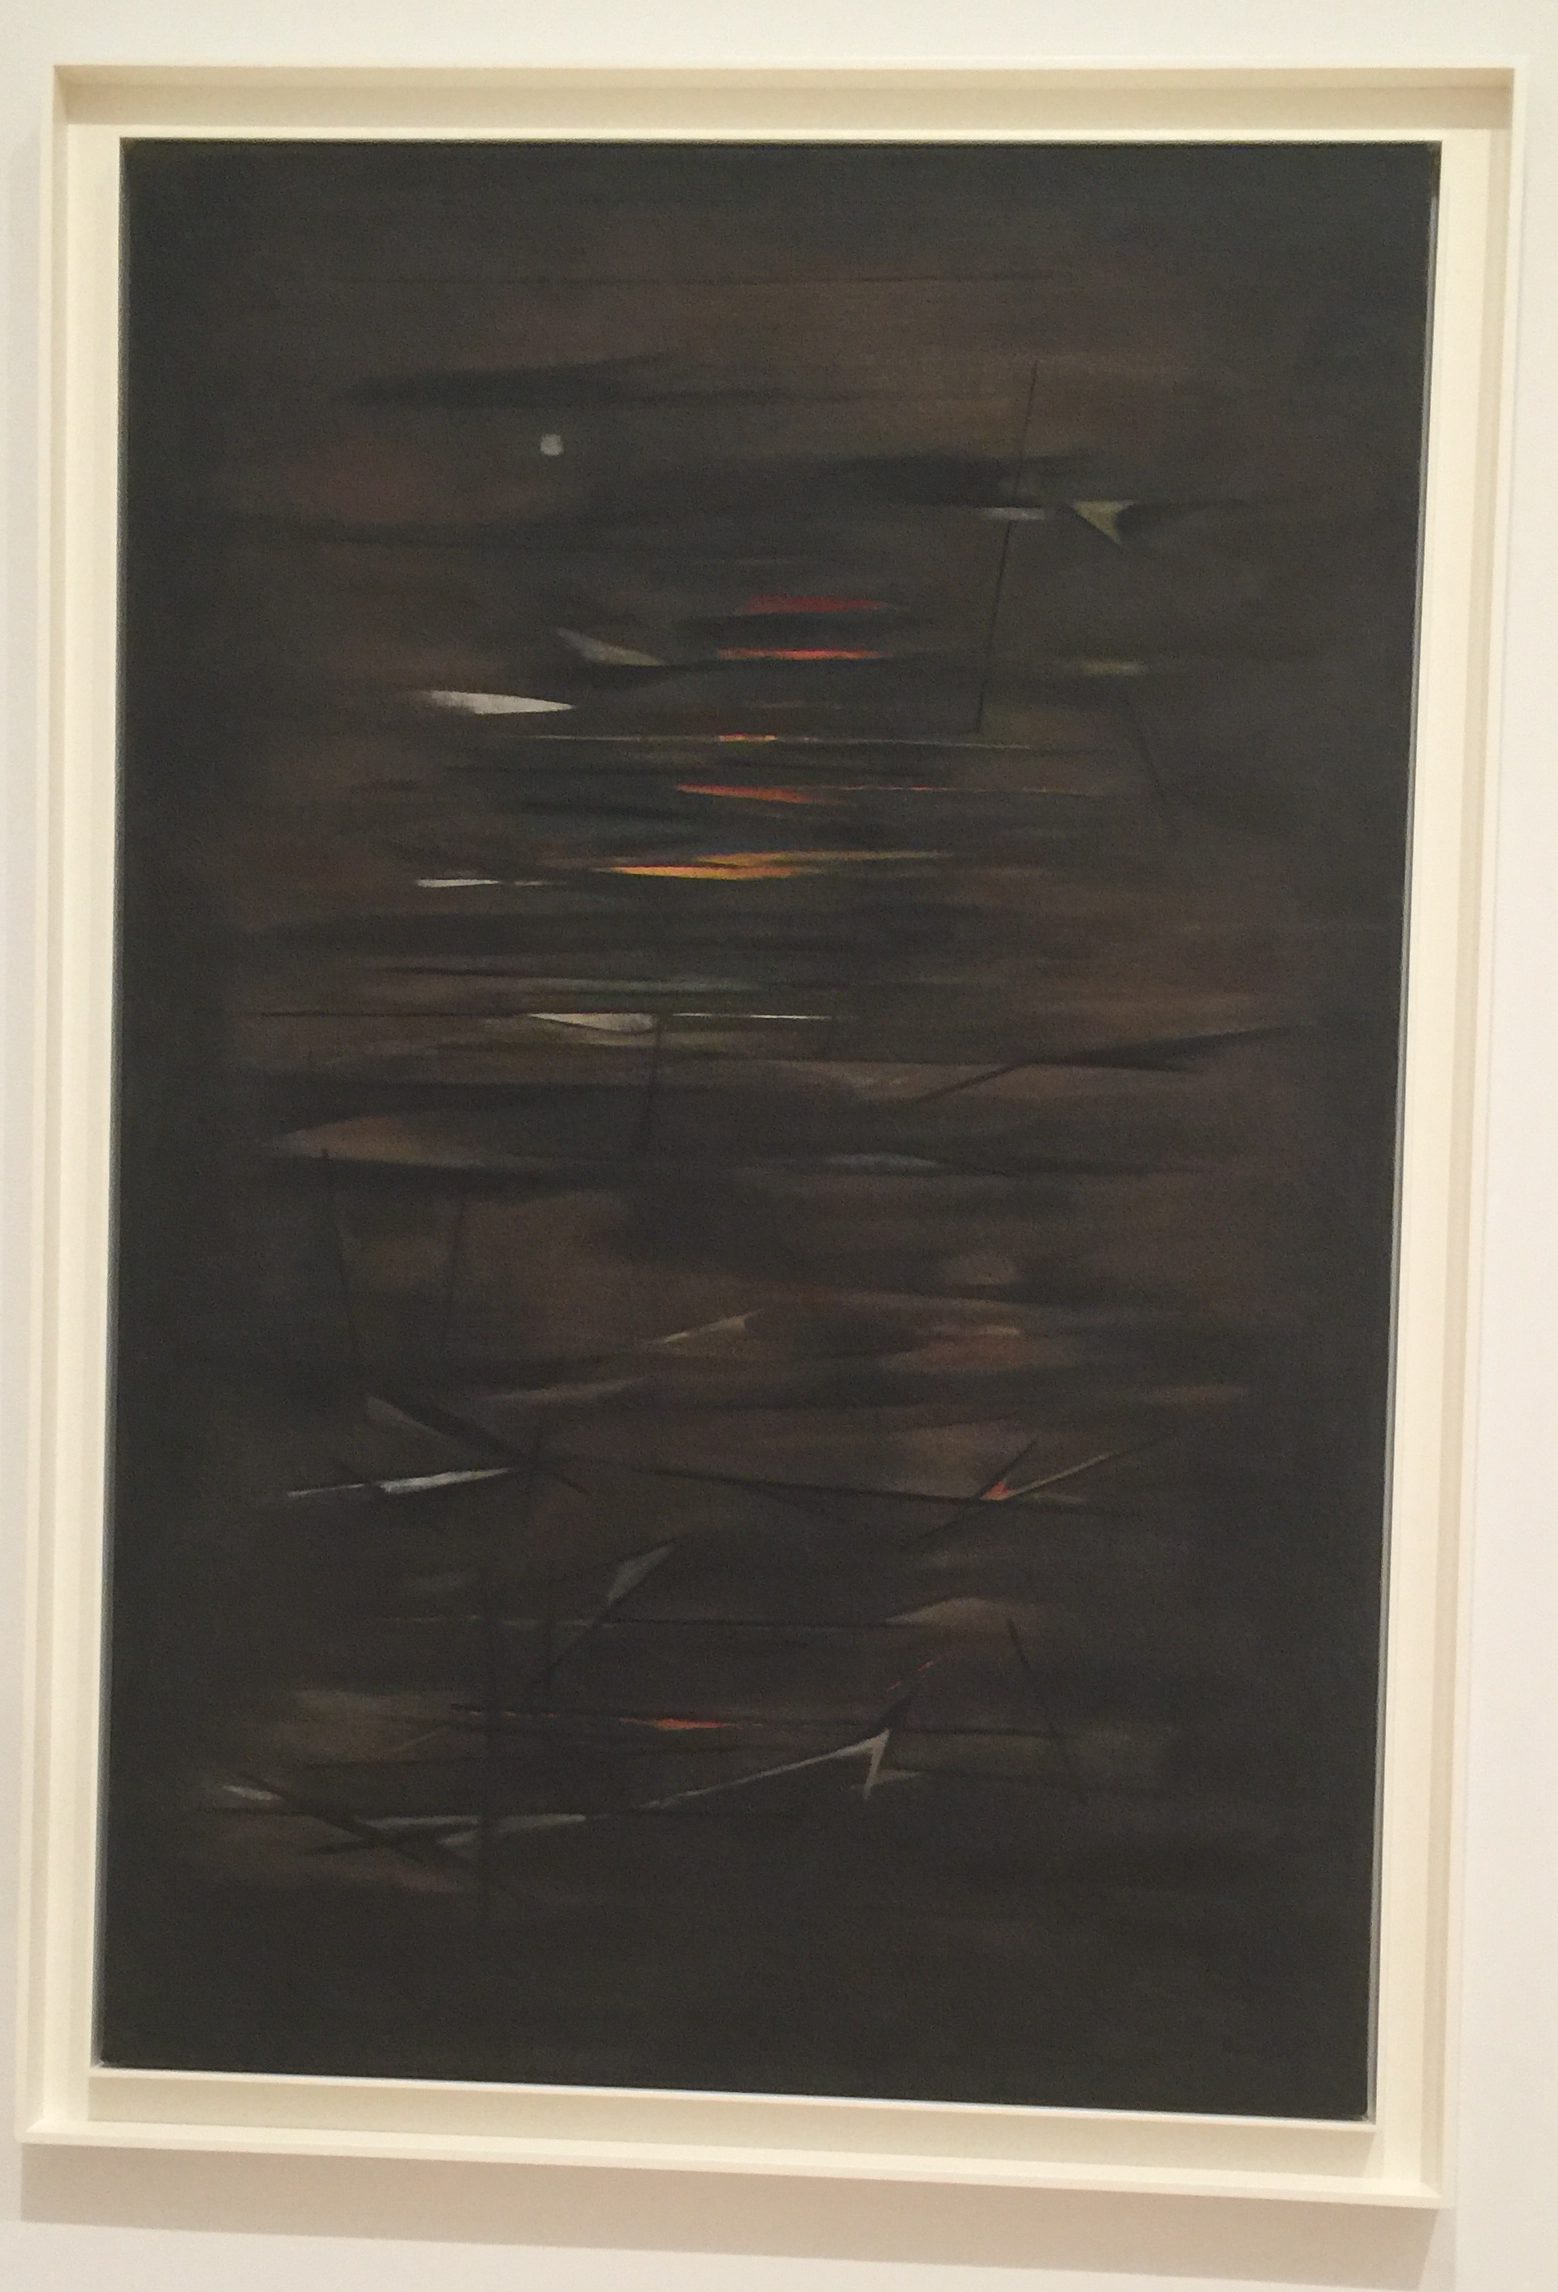 A painting with a dark image of what looks like ocean, littered with broken ships